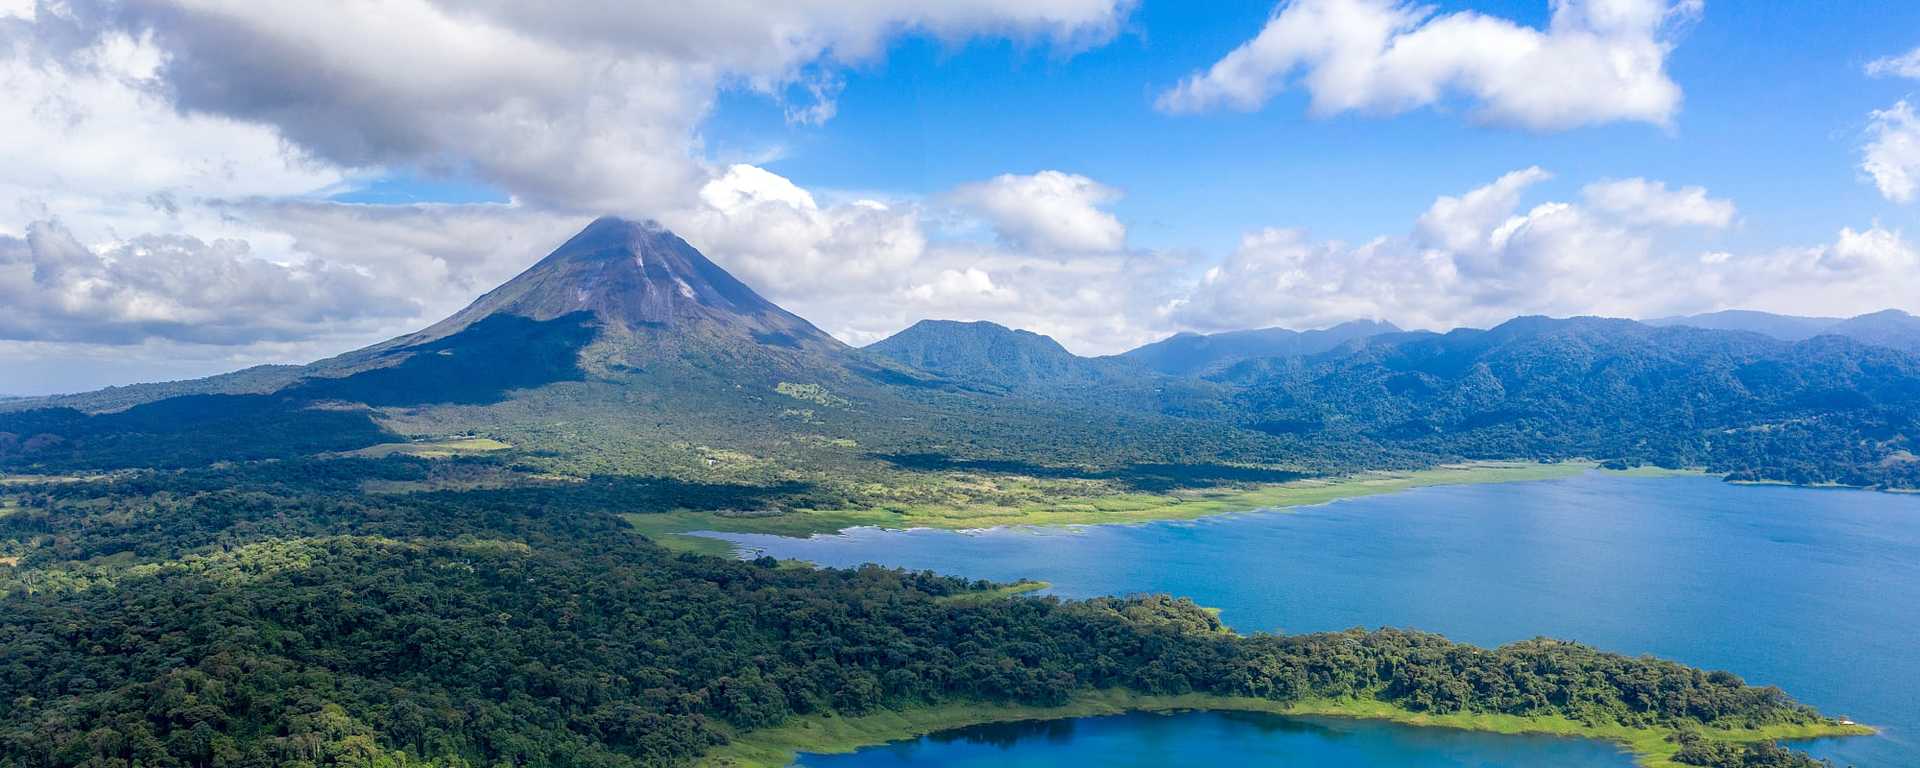 Lake Arenal and Arenal Volcano in Costa Rica